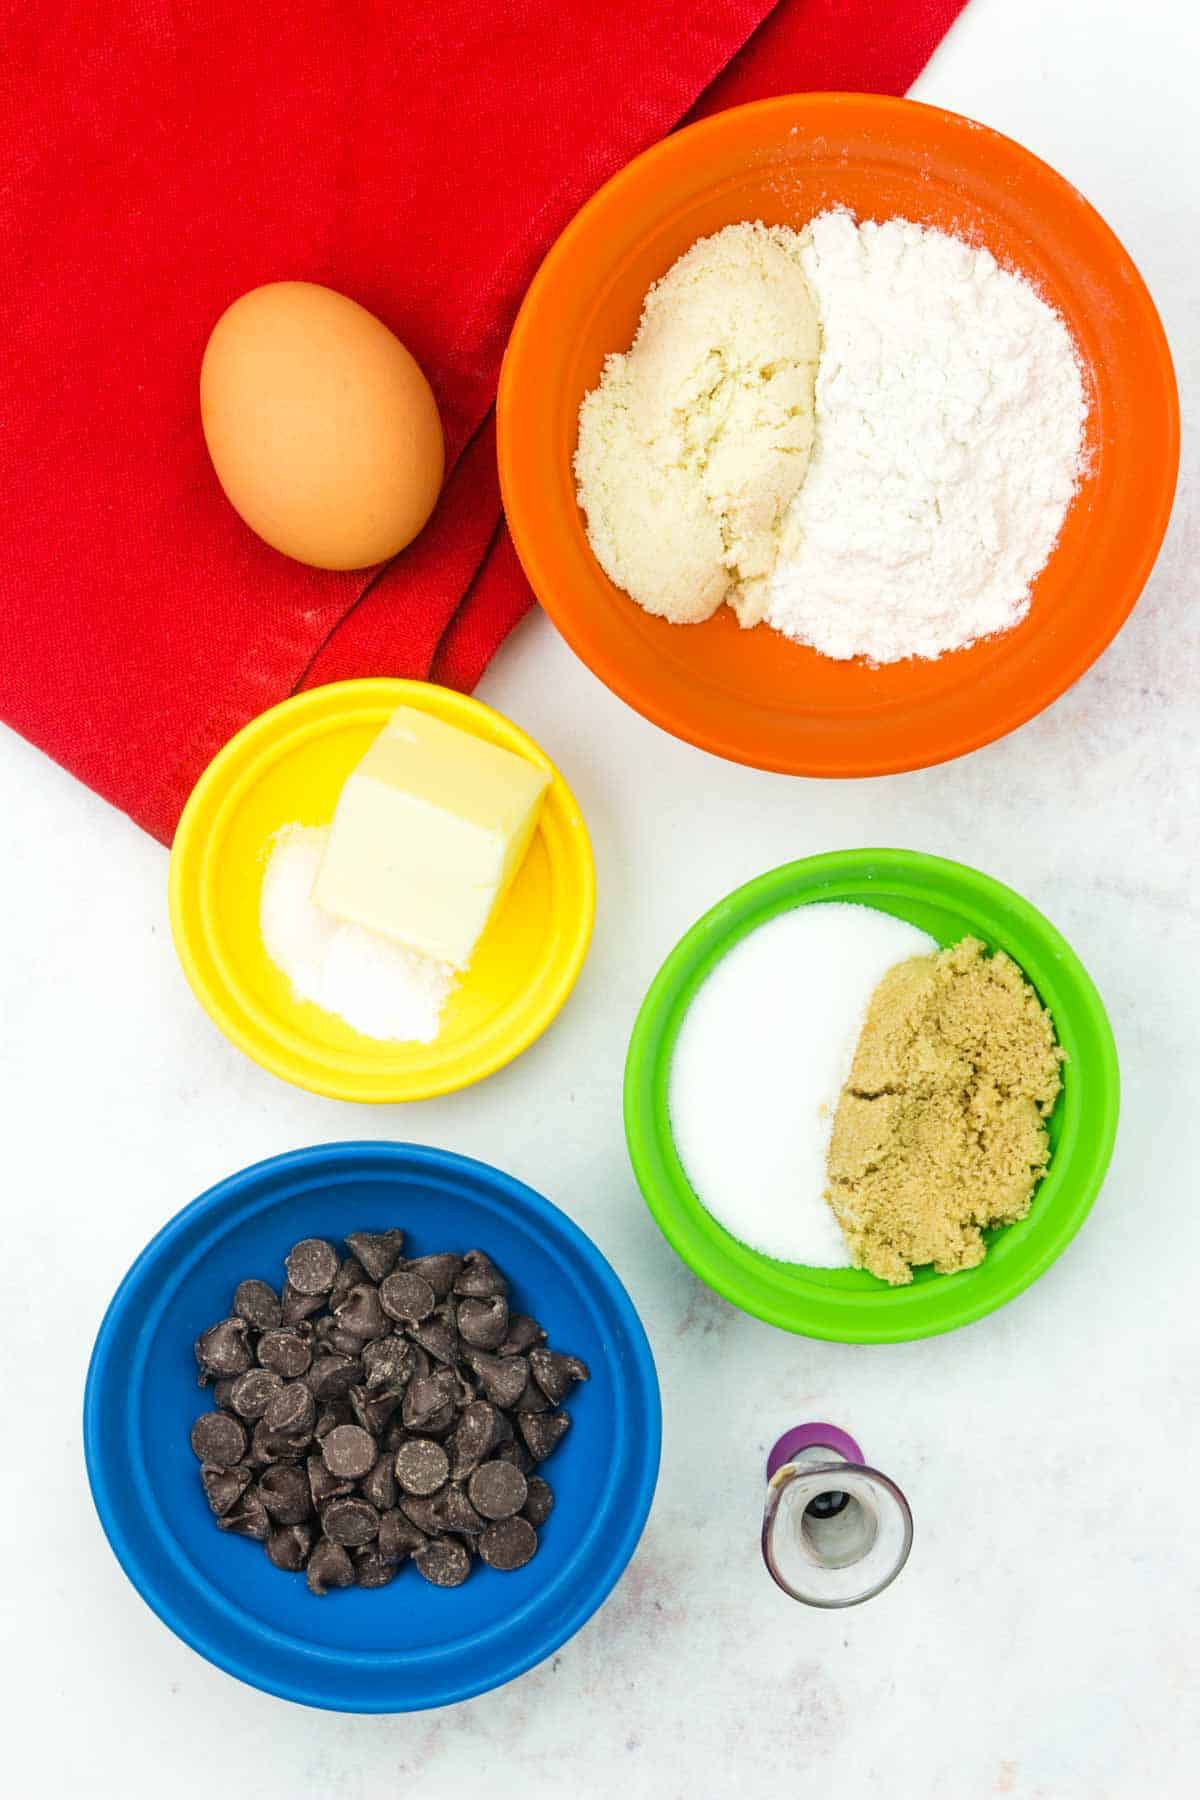 The ingredients for chocolate chip cookie in a mug are shown portioned out: melted butter, sugar, brown sugar, vanilla, egg, oat flour, almond meal, salt, baking powder, chocolate chips.